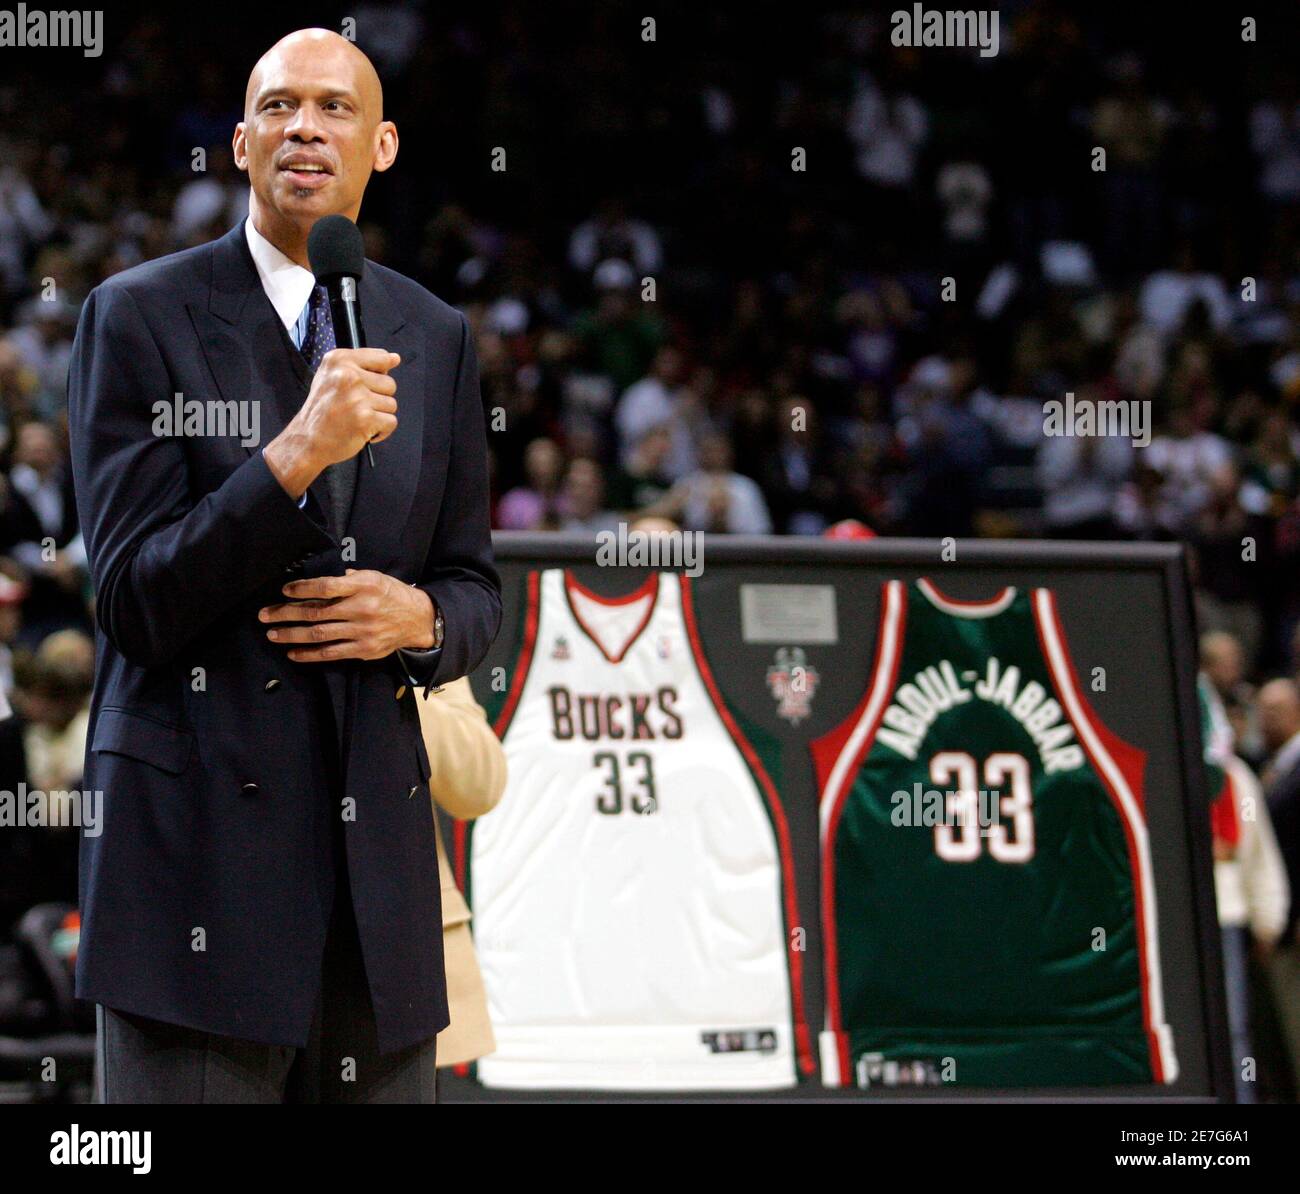 Fromer Milwaukee Bucks center Kareem Abdul-Jabbar speaks to fans after his jersey  number 33 was retired by the Bucks at halftime of an NBA basketball game  between the Bucks and Los Angeles